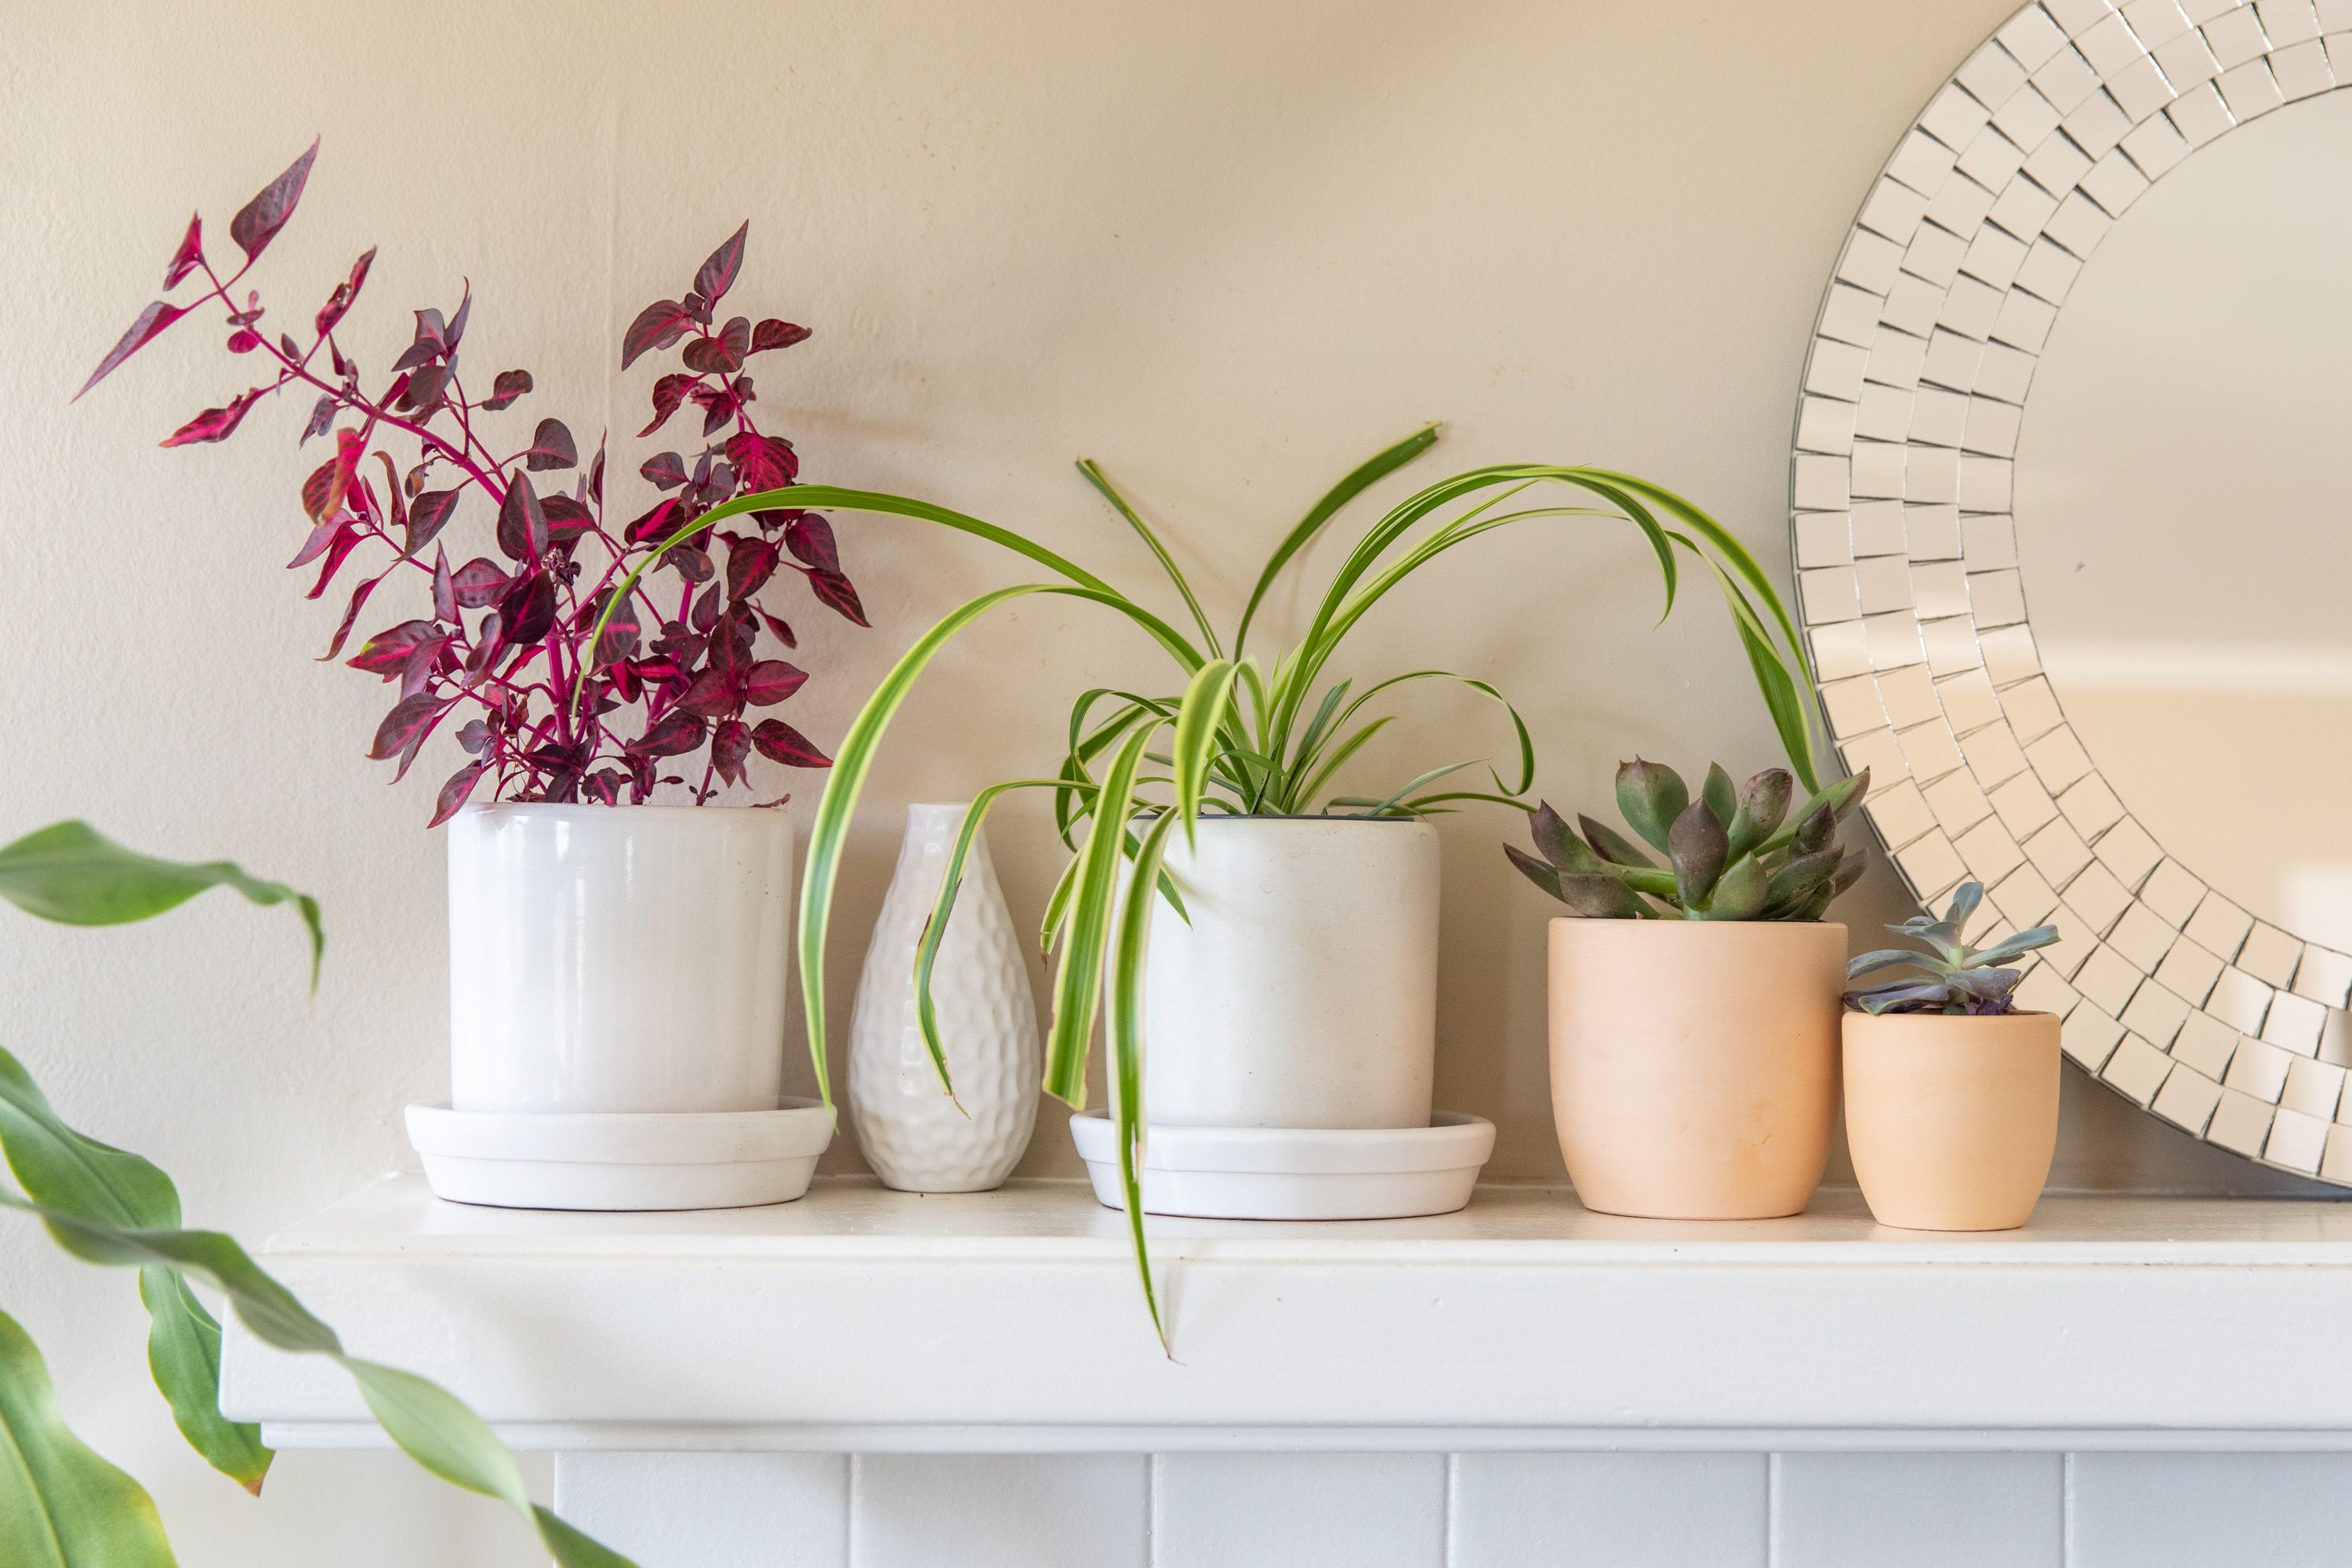 Our Favorite Ways to Decorate With Plants